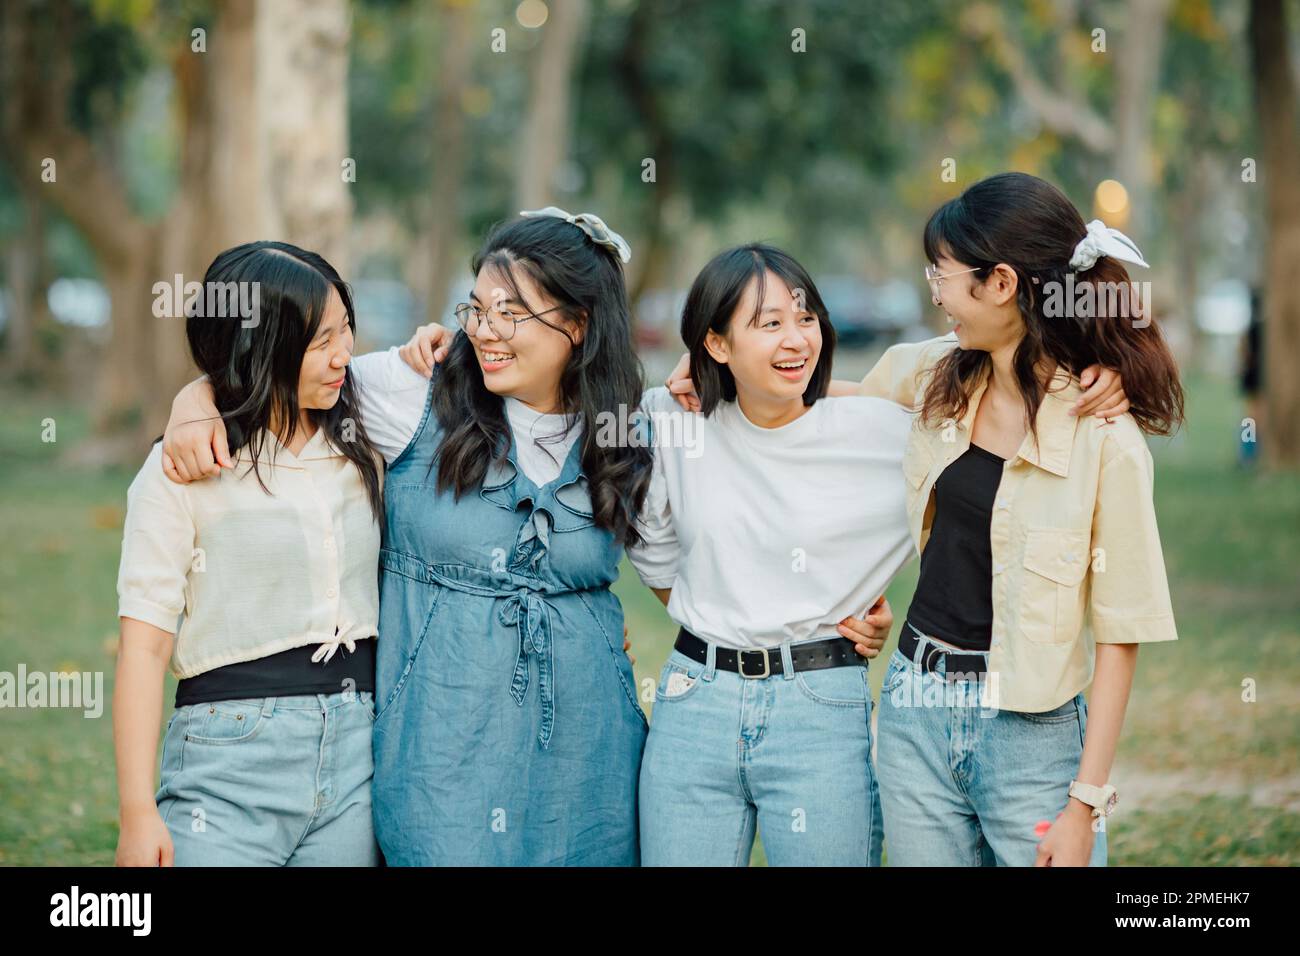 Groups of friends embrace each other together. Concept for kindness support of people having fun with diversity millenials of gen z. Stock Photo